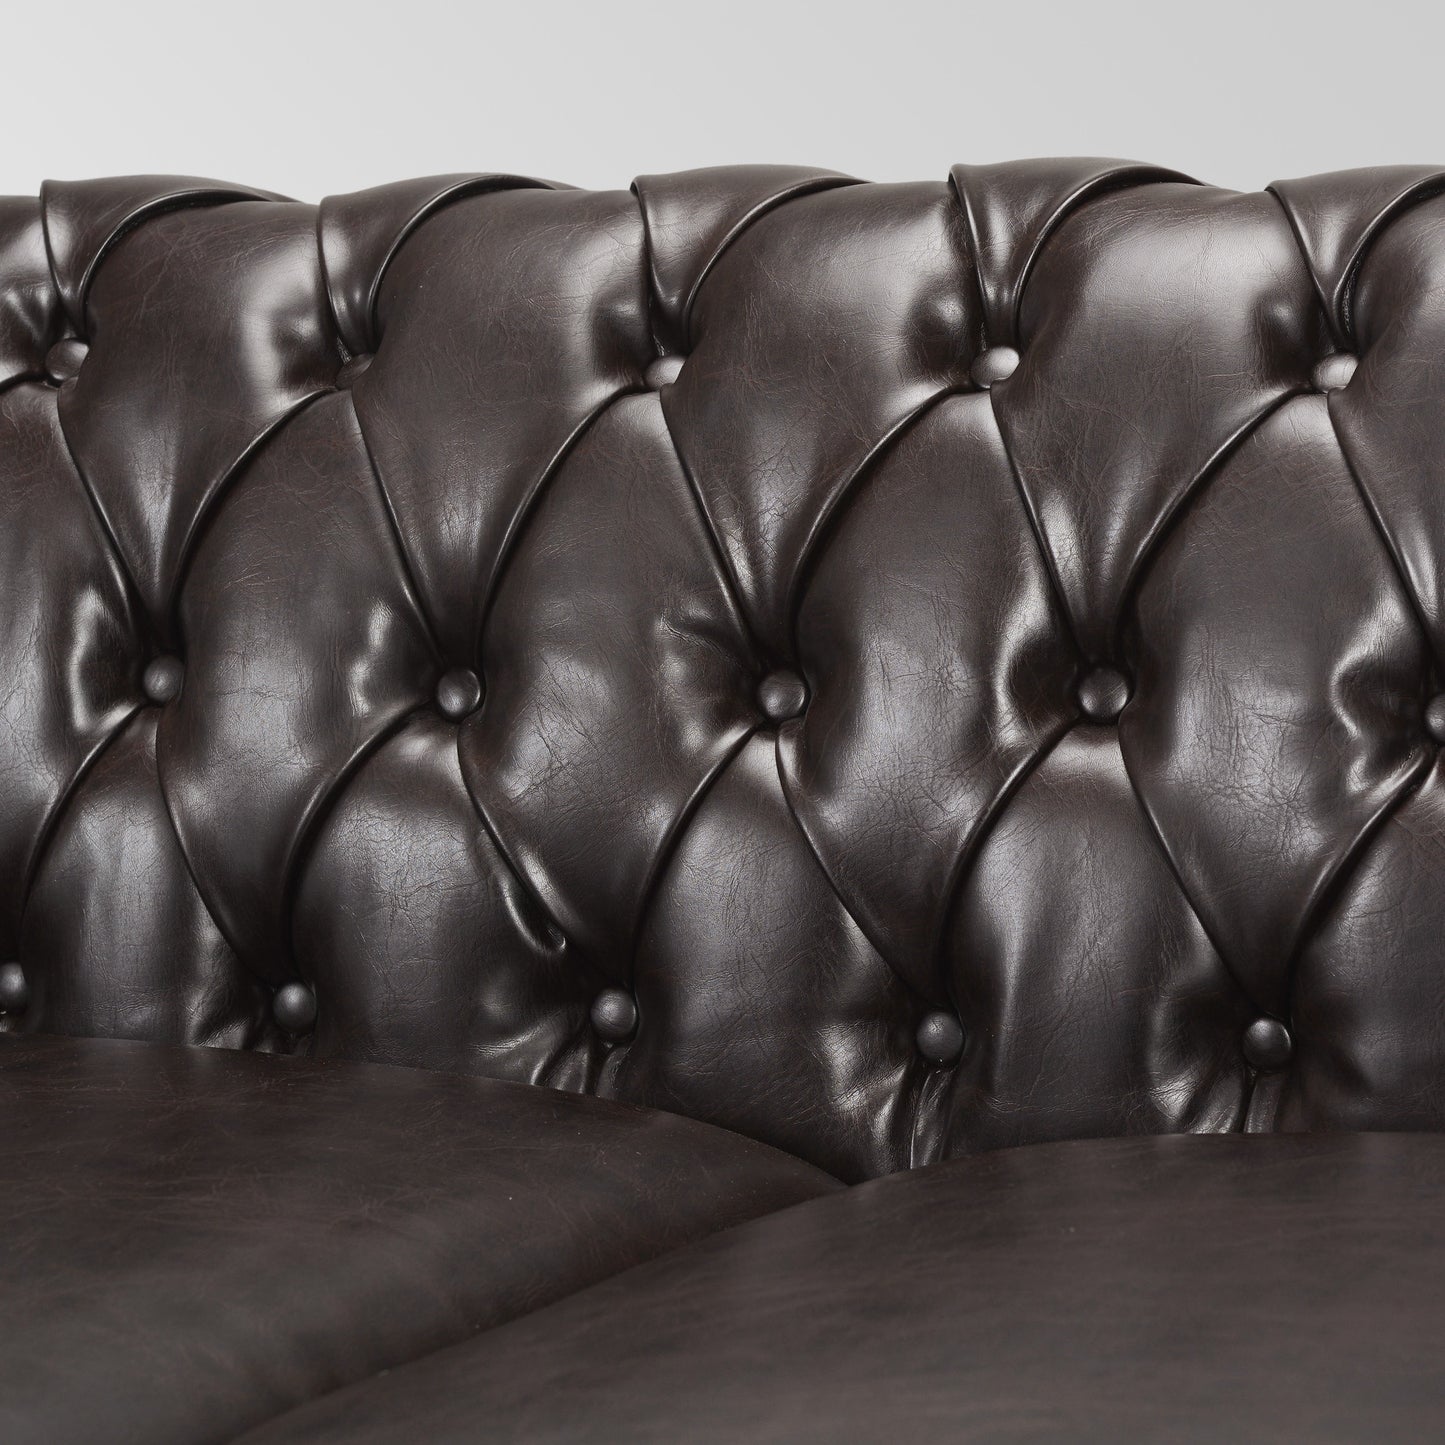 Adetokunbo Tufted Leather Chesterfield 3 Seater Sofa